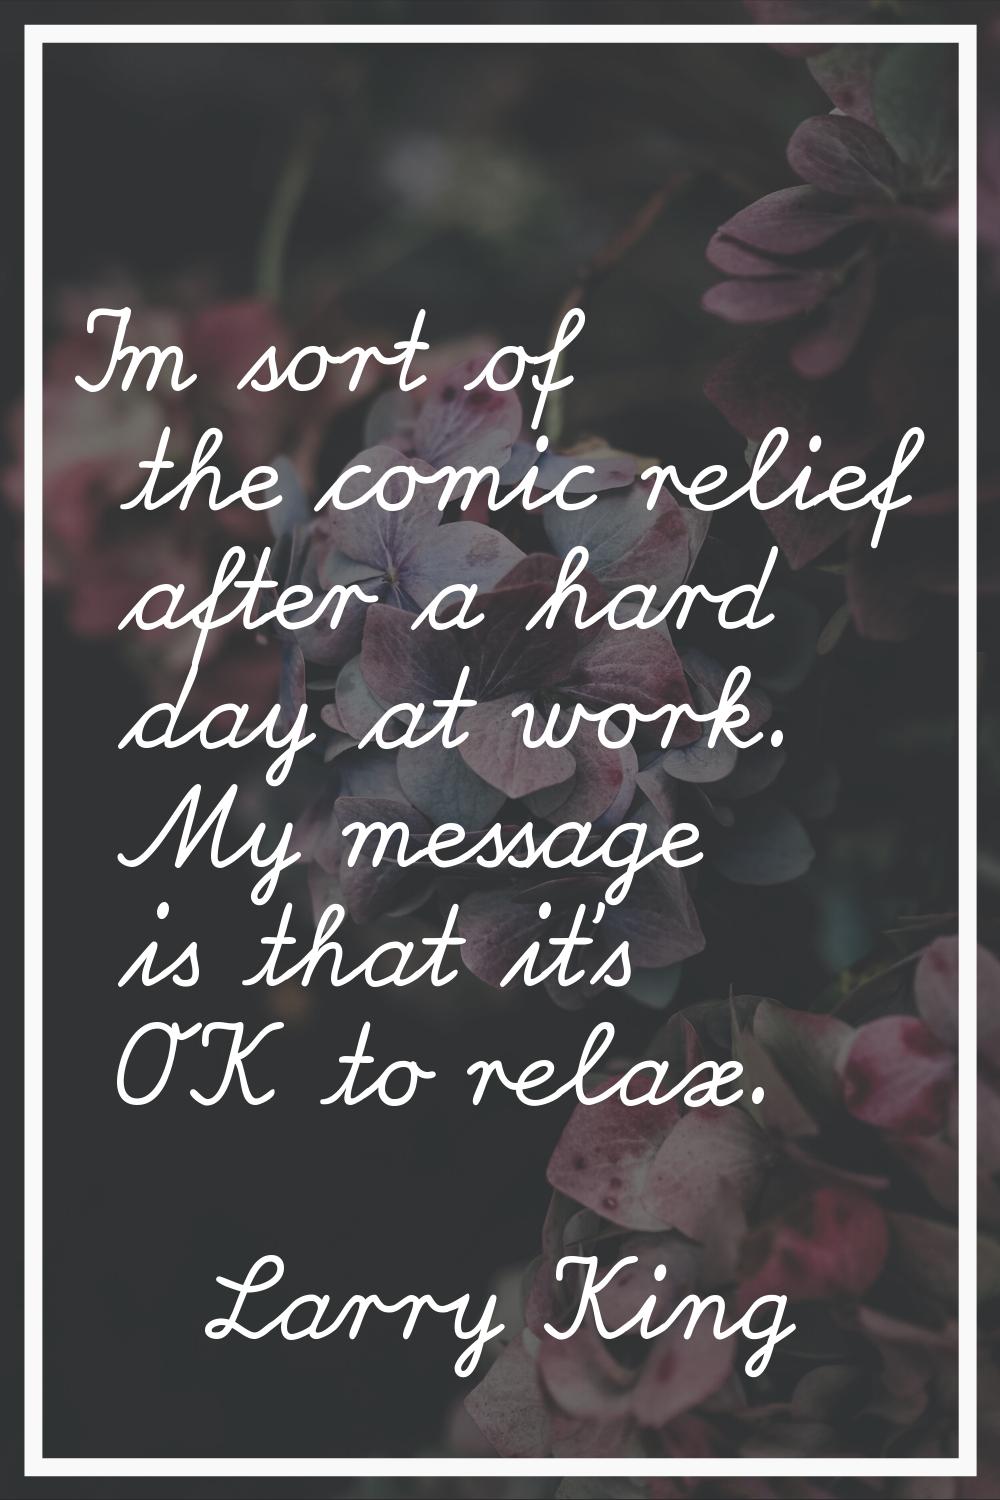 I'm sort of the comic relief after a hard day at work. My message is that it's OK to relax.